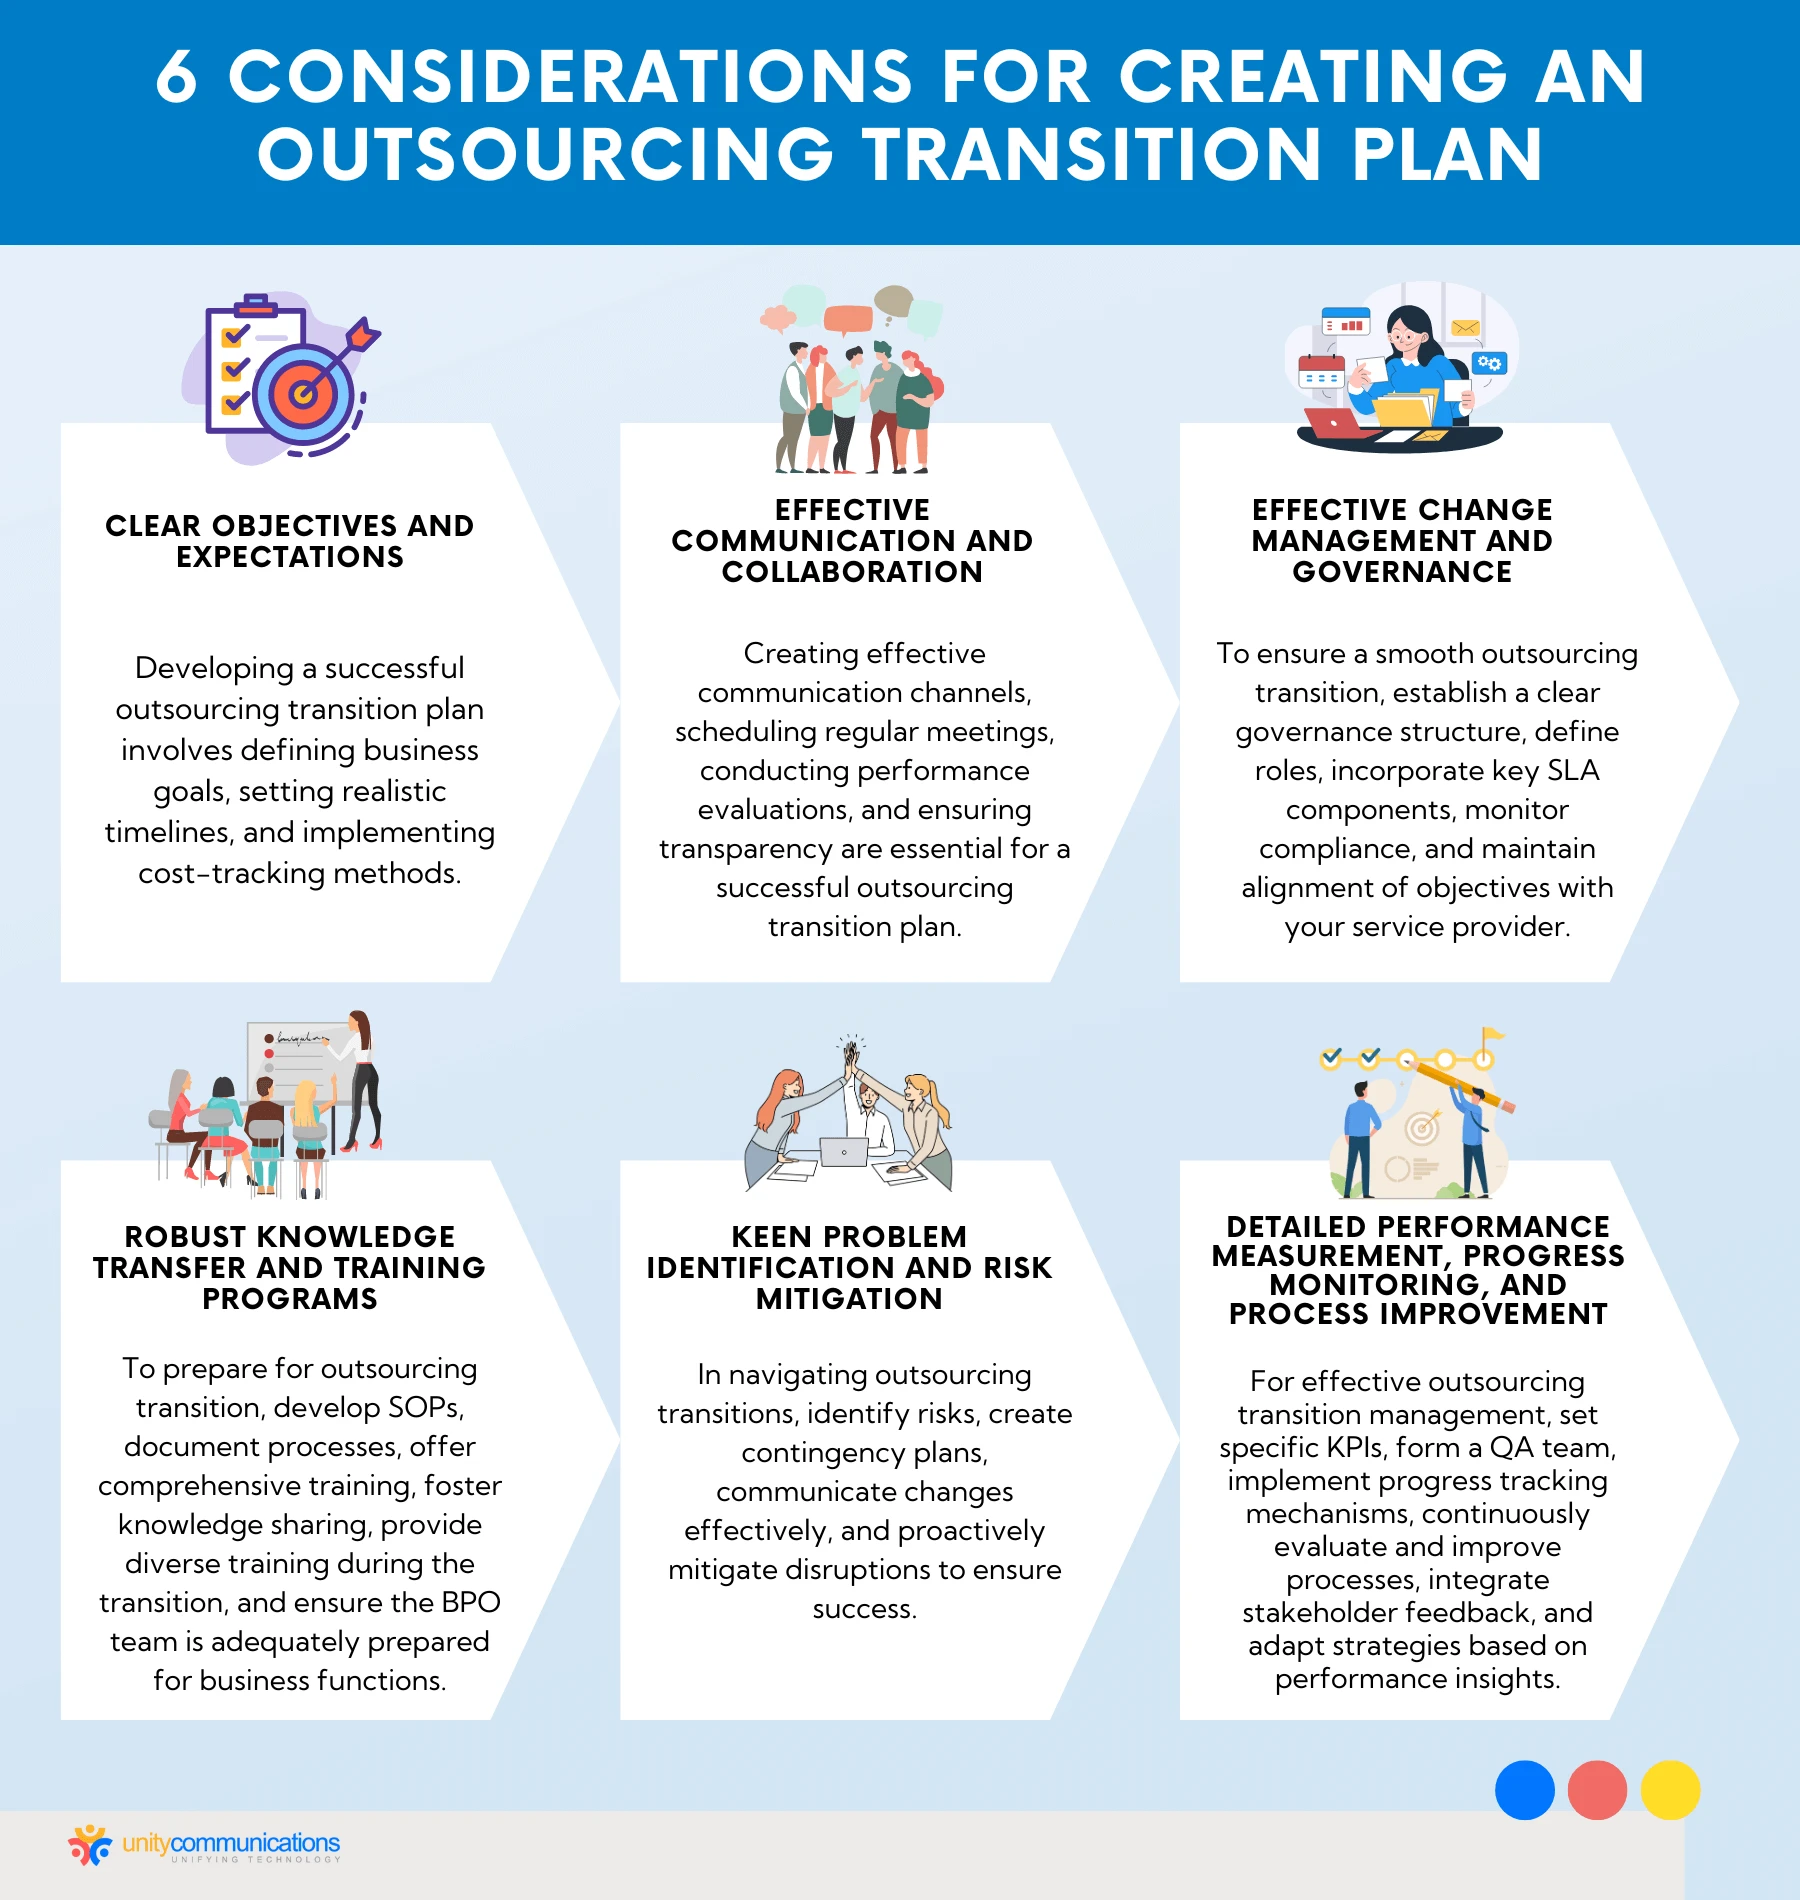 6 Considerations for Creating an Outsourcing Transition Plan